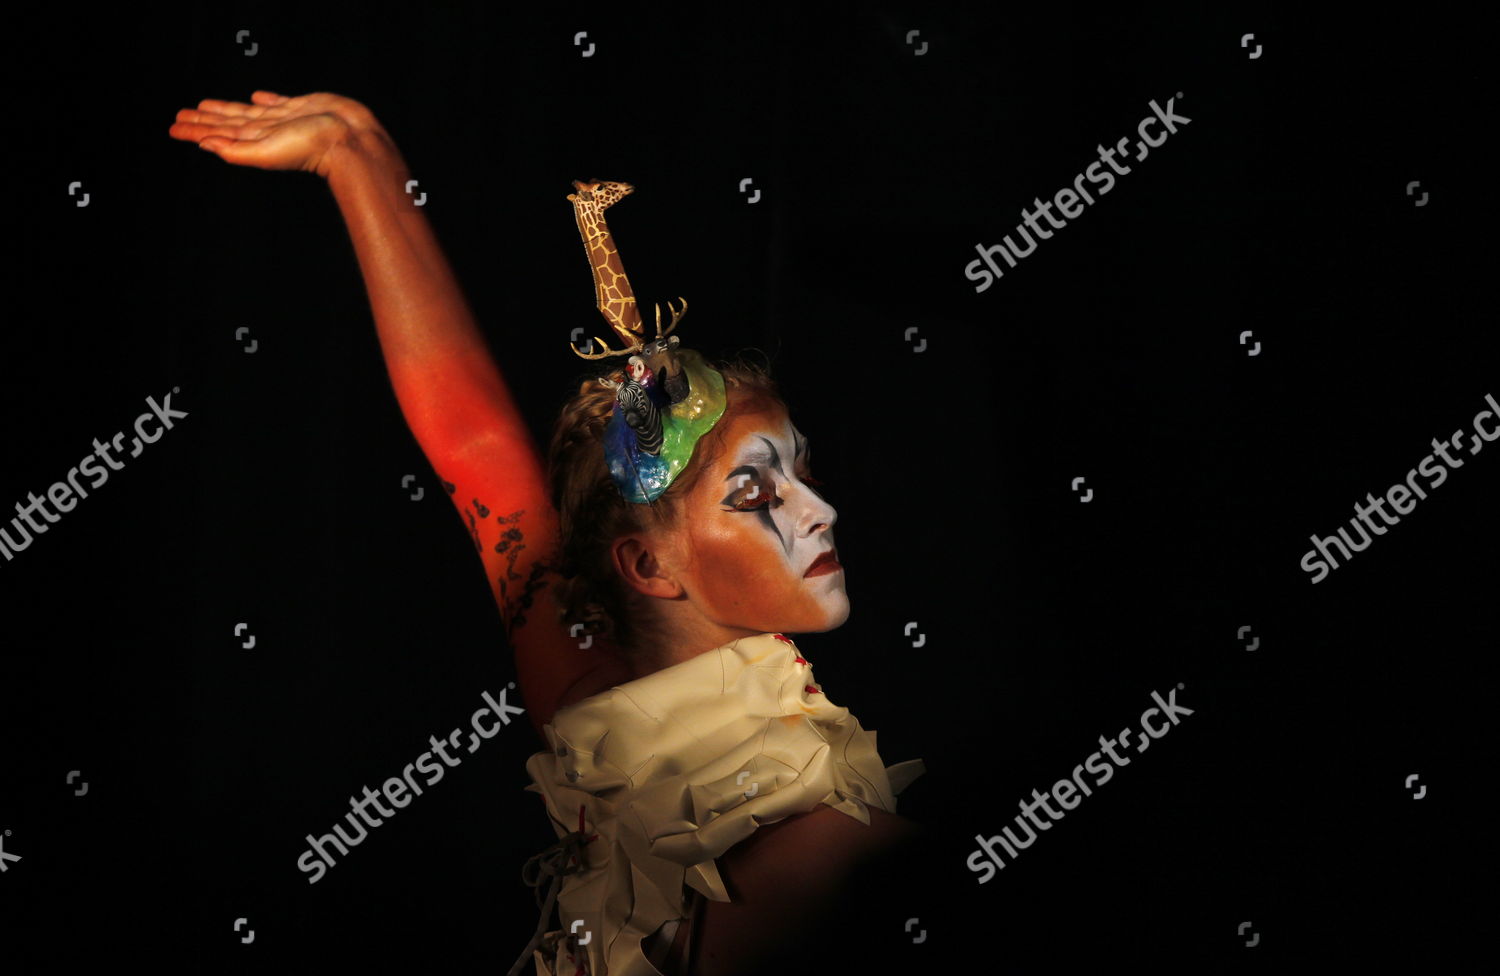 Dancer Meike Behrmann Has Her Body Painting Editorial Stock Photo